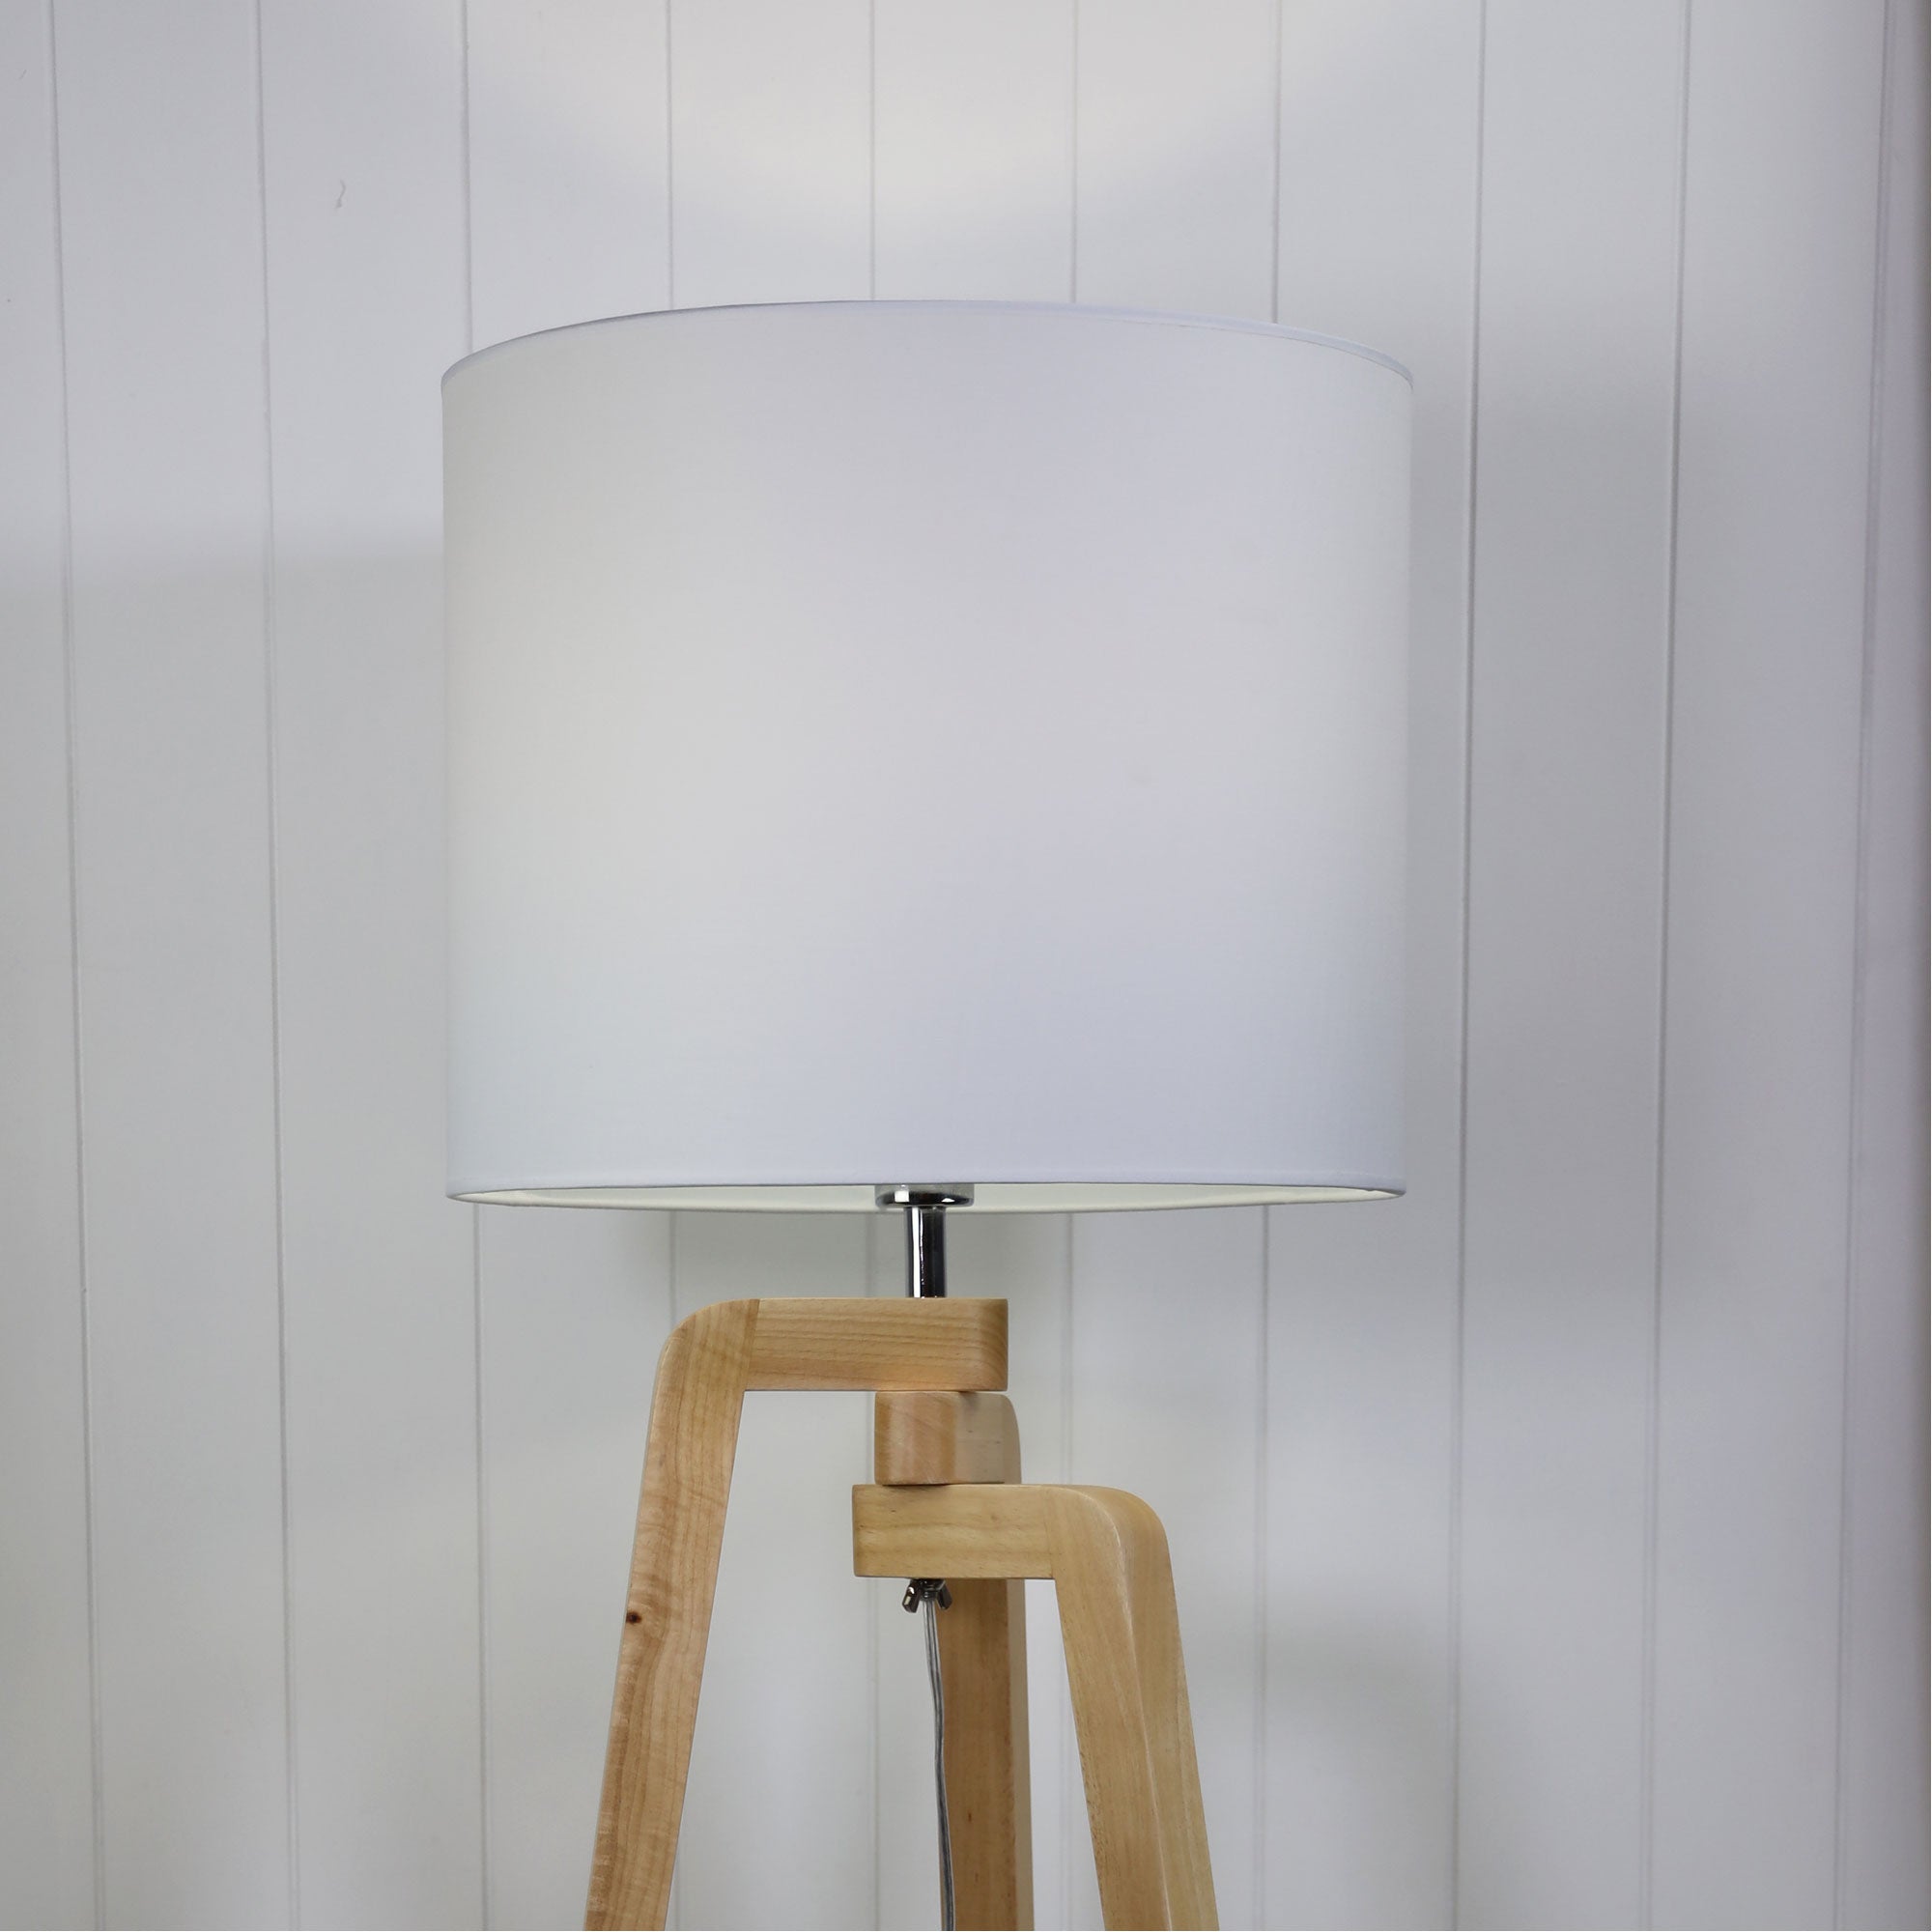 Lund 1 Light Timber Floor Lamp With White Cotton Shade - OL93523WH